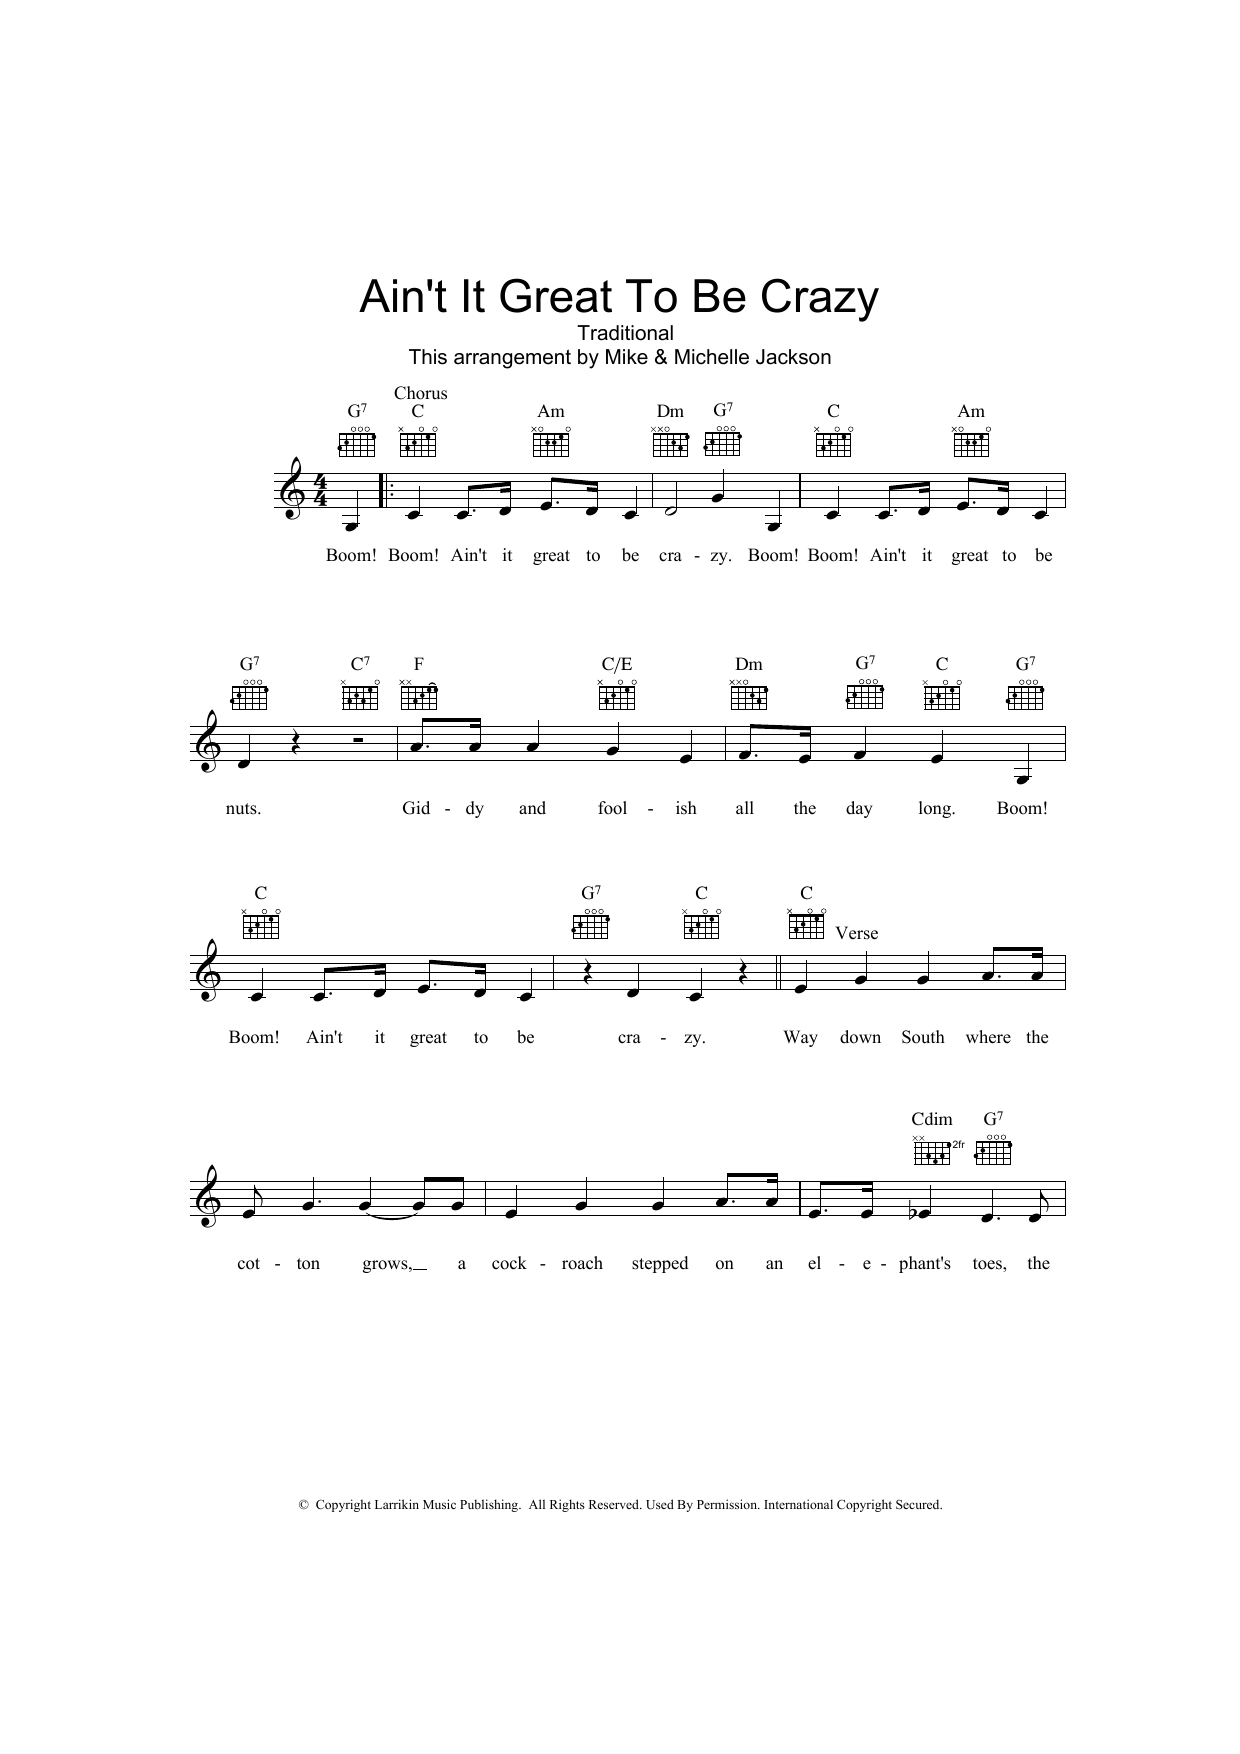 Download Traditional Ain't It Great To Be Crazy Sheet Music